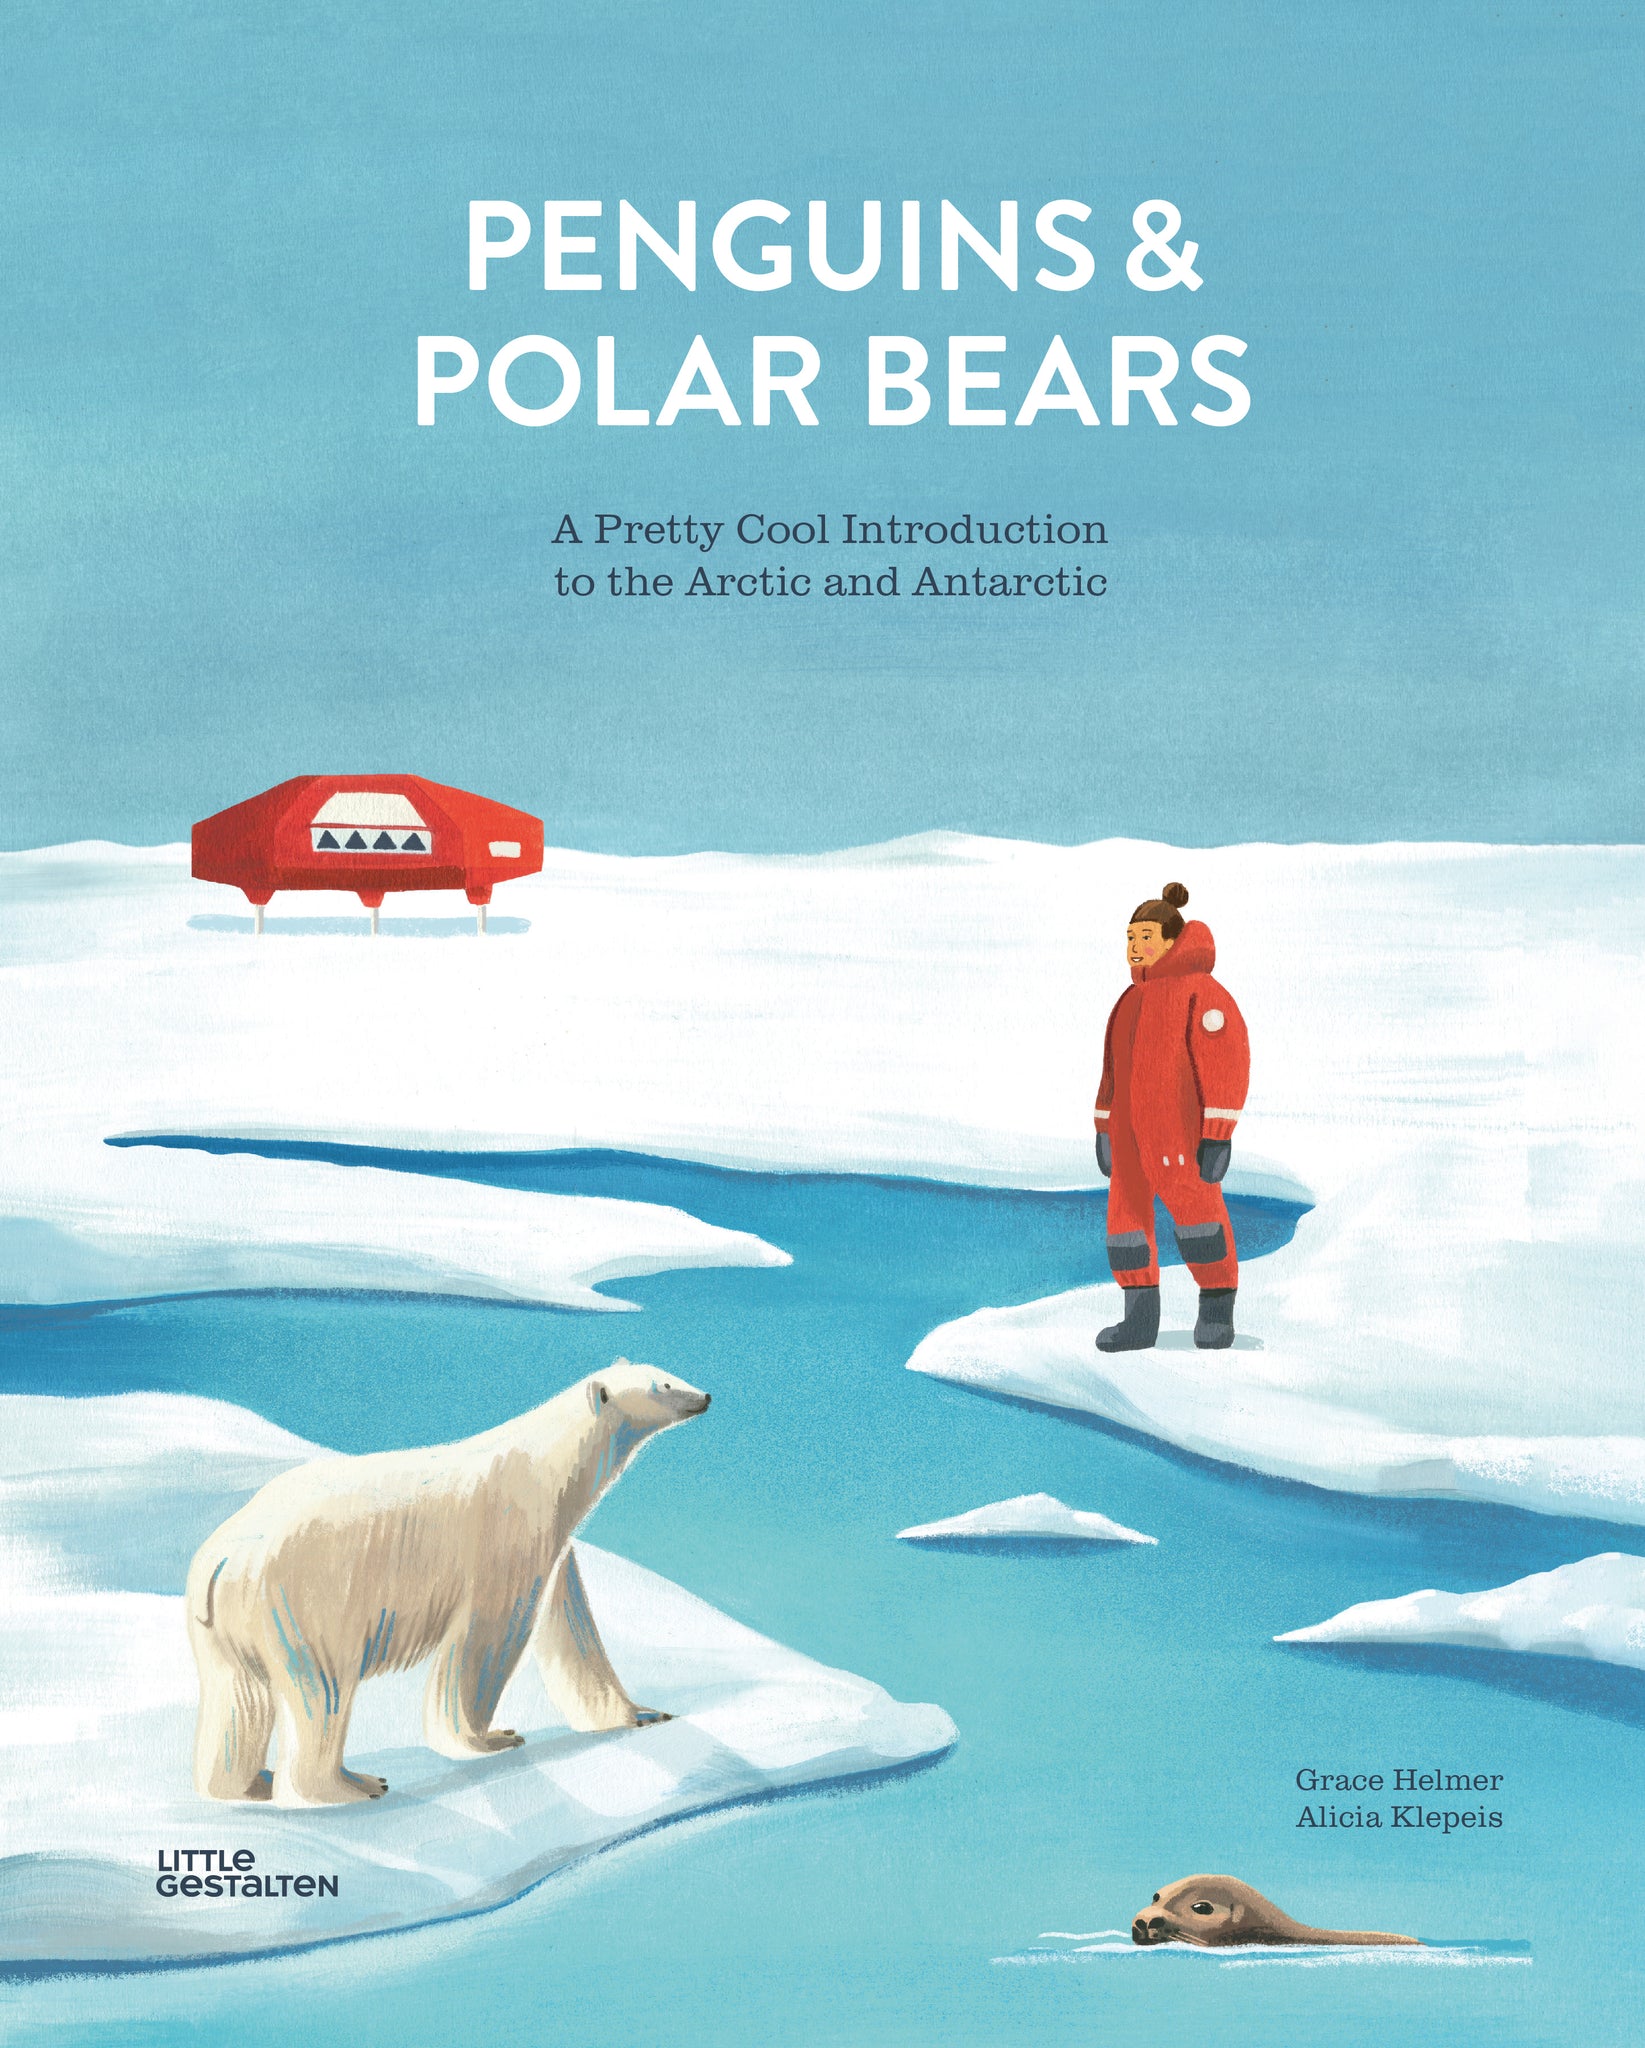 Penguins and Polar Bears (was announced as Polar): A Pretty Cool Introduction to the Arctic and Antarctic cover